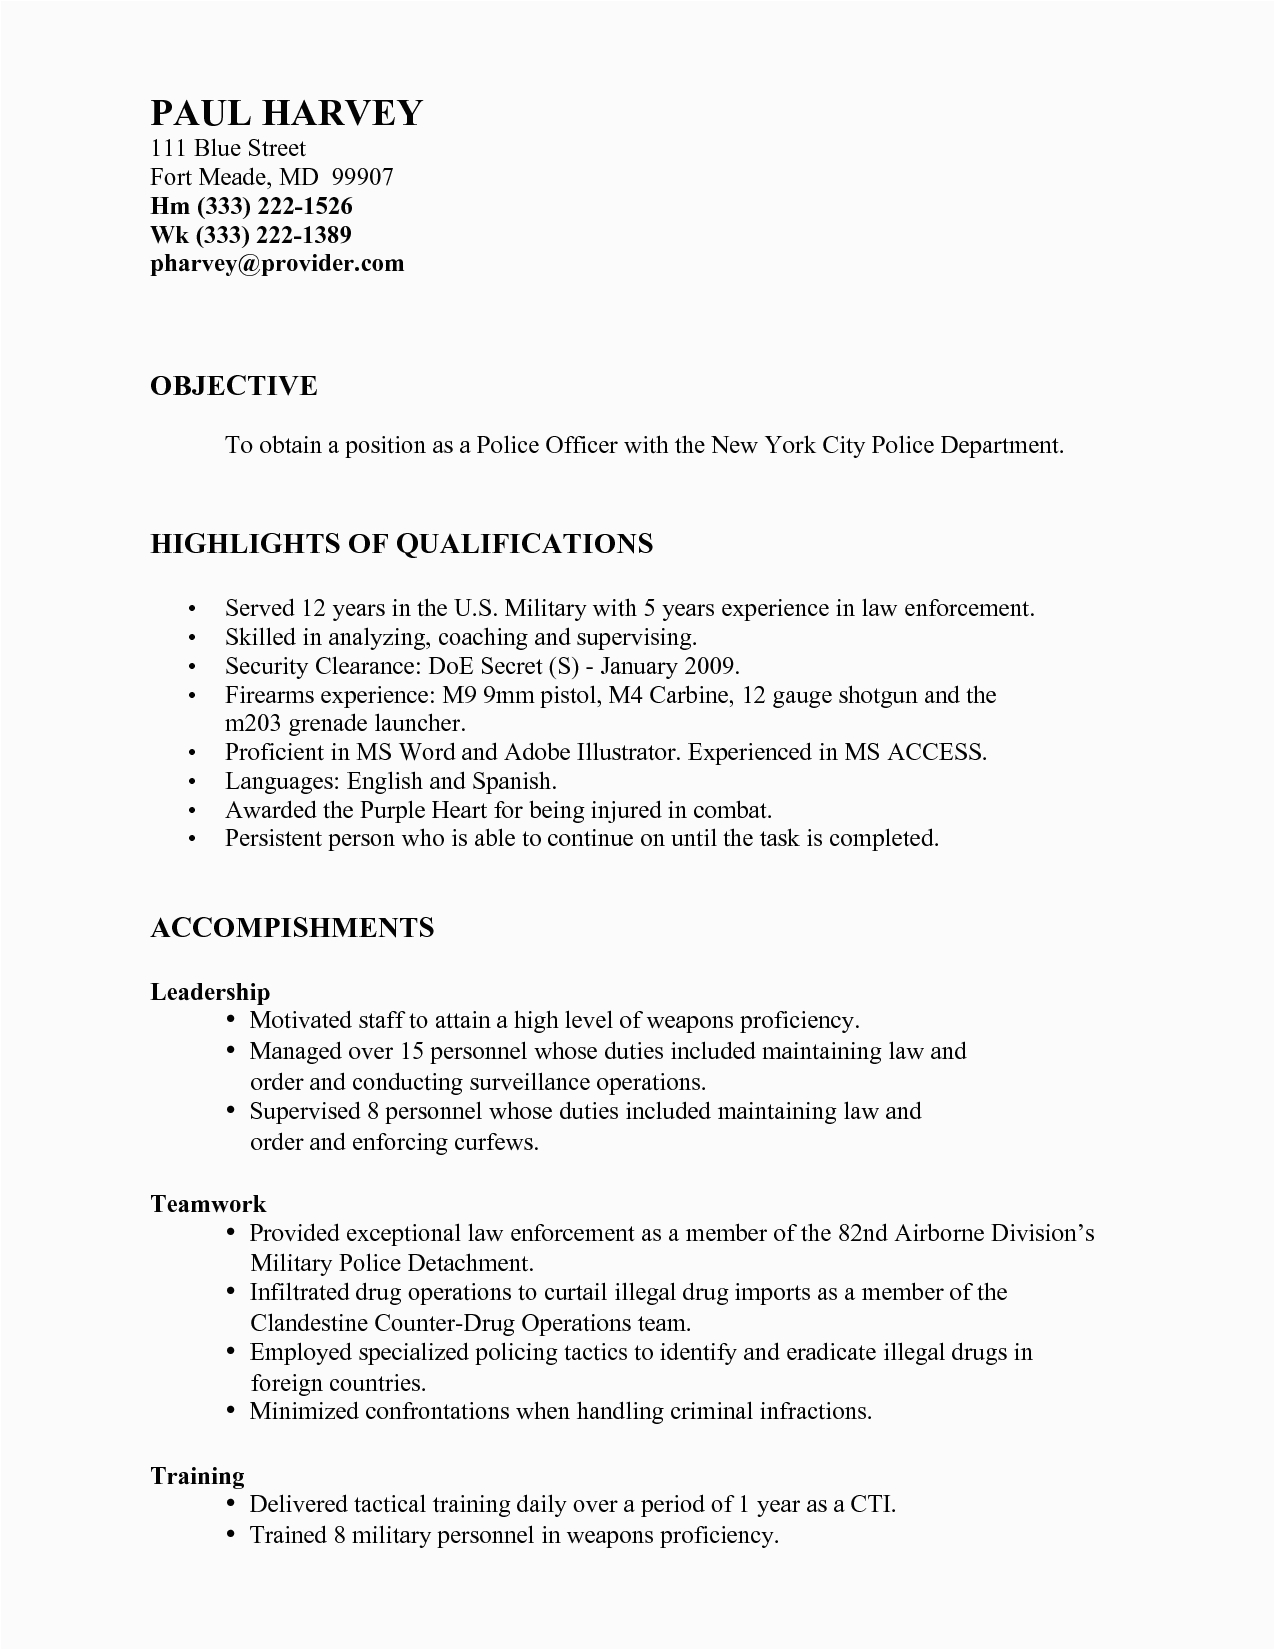 Sample Resume Objectives for Law Enforcement Resume for Police Ficer with No Experience